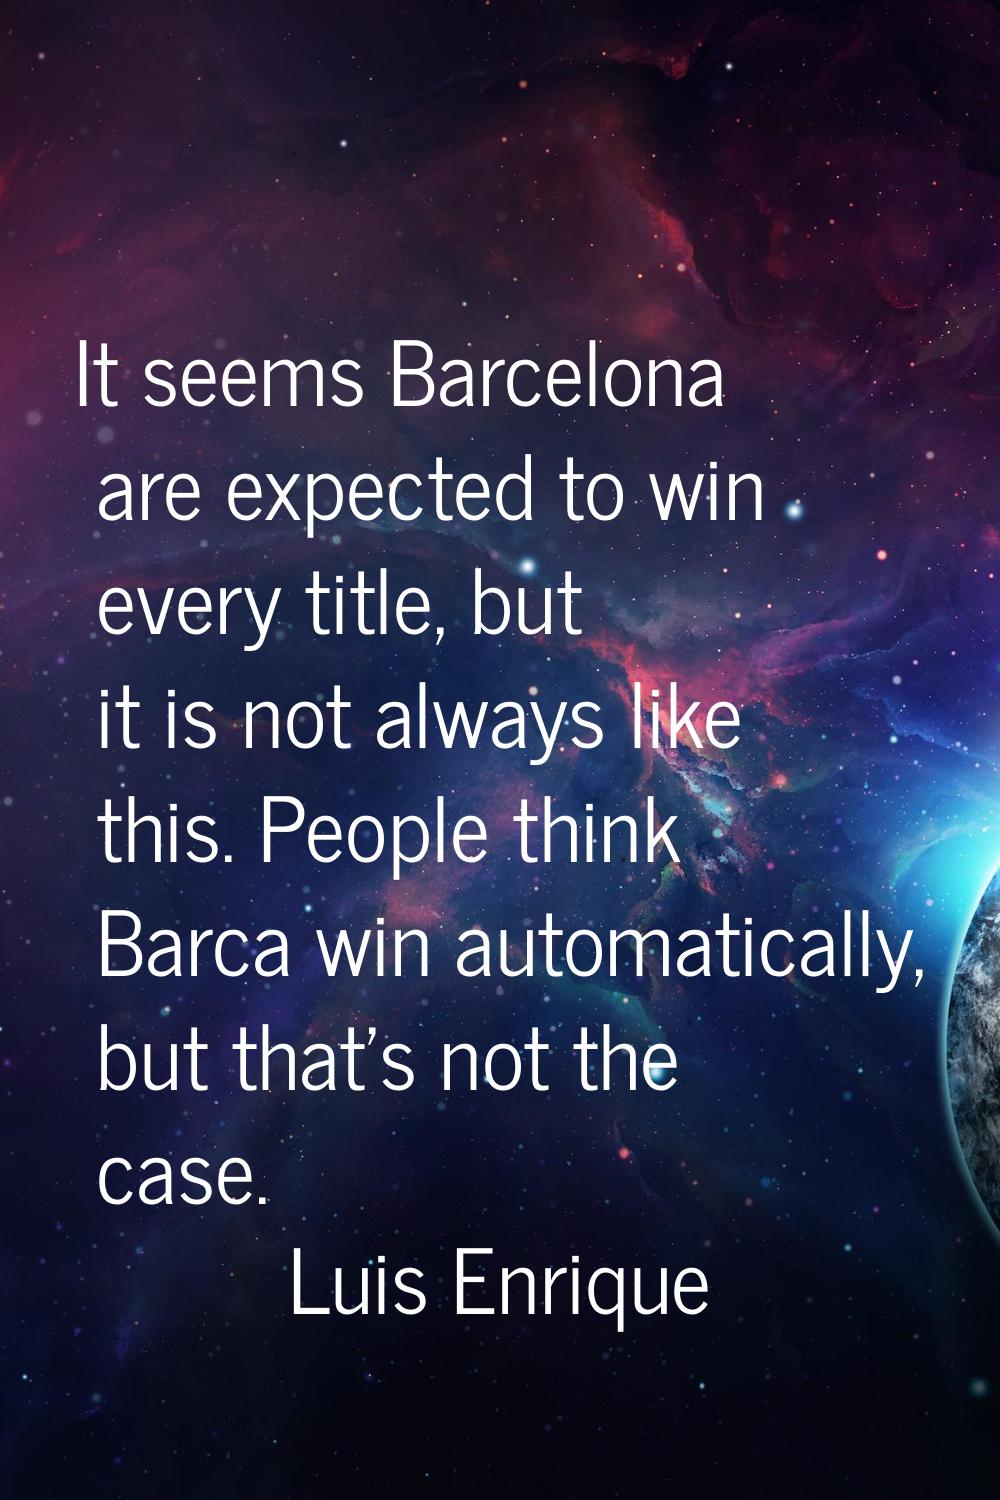 It seems Barcelona are expected to win every title, but it is not always like this. People think Ba